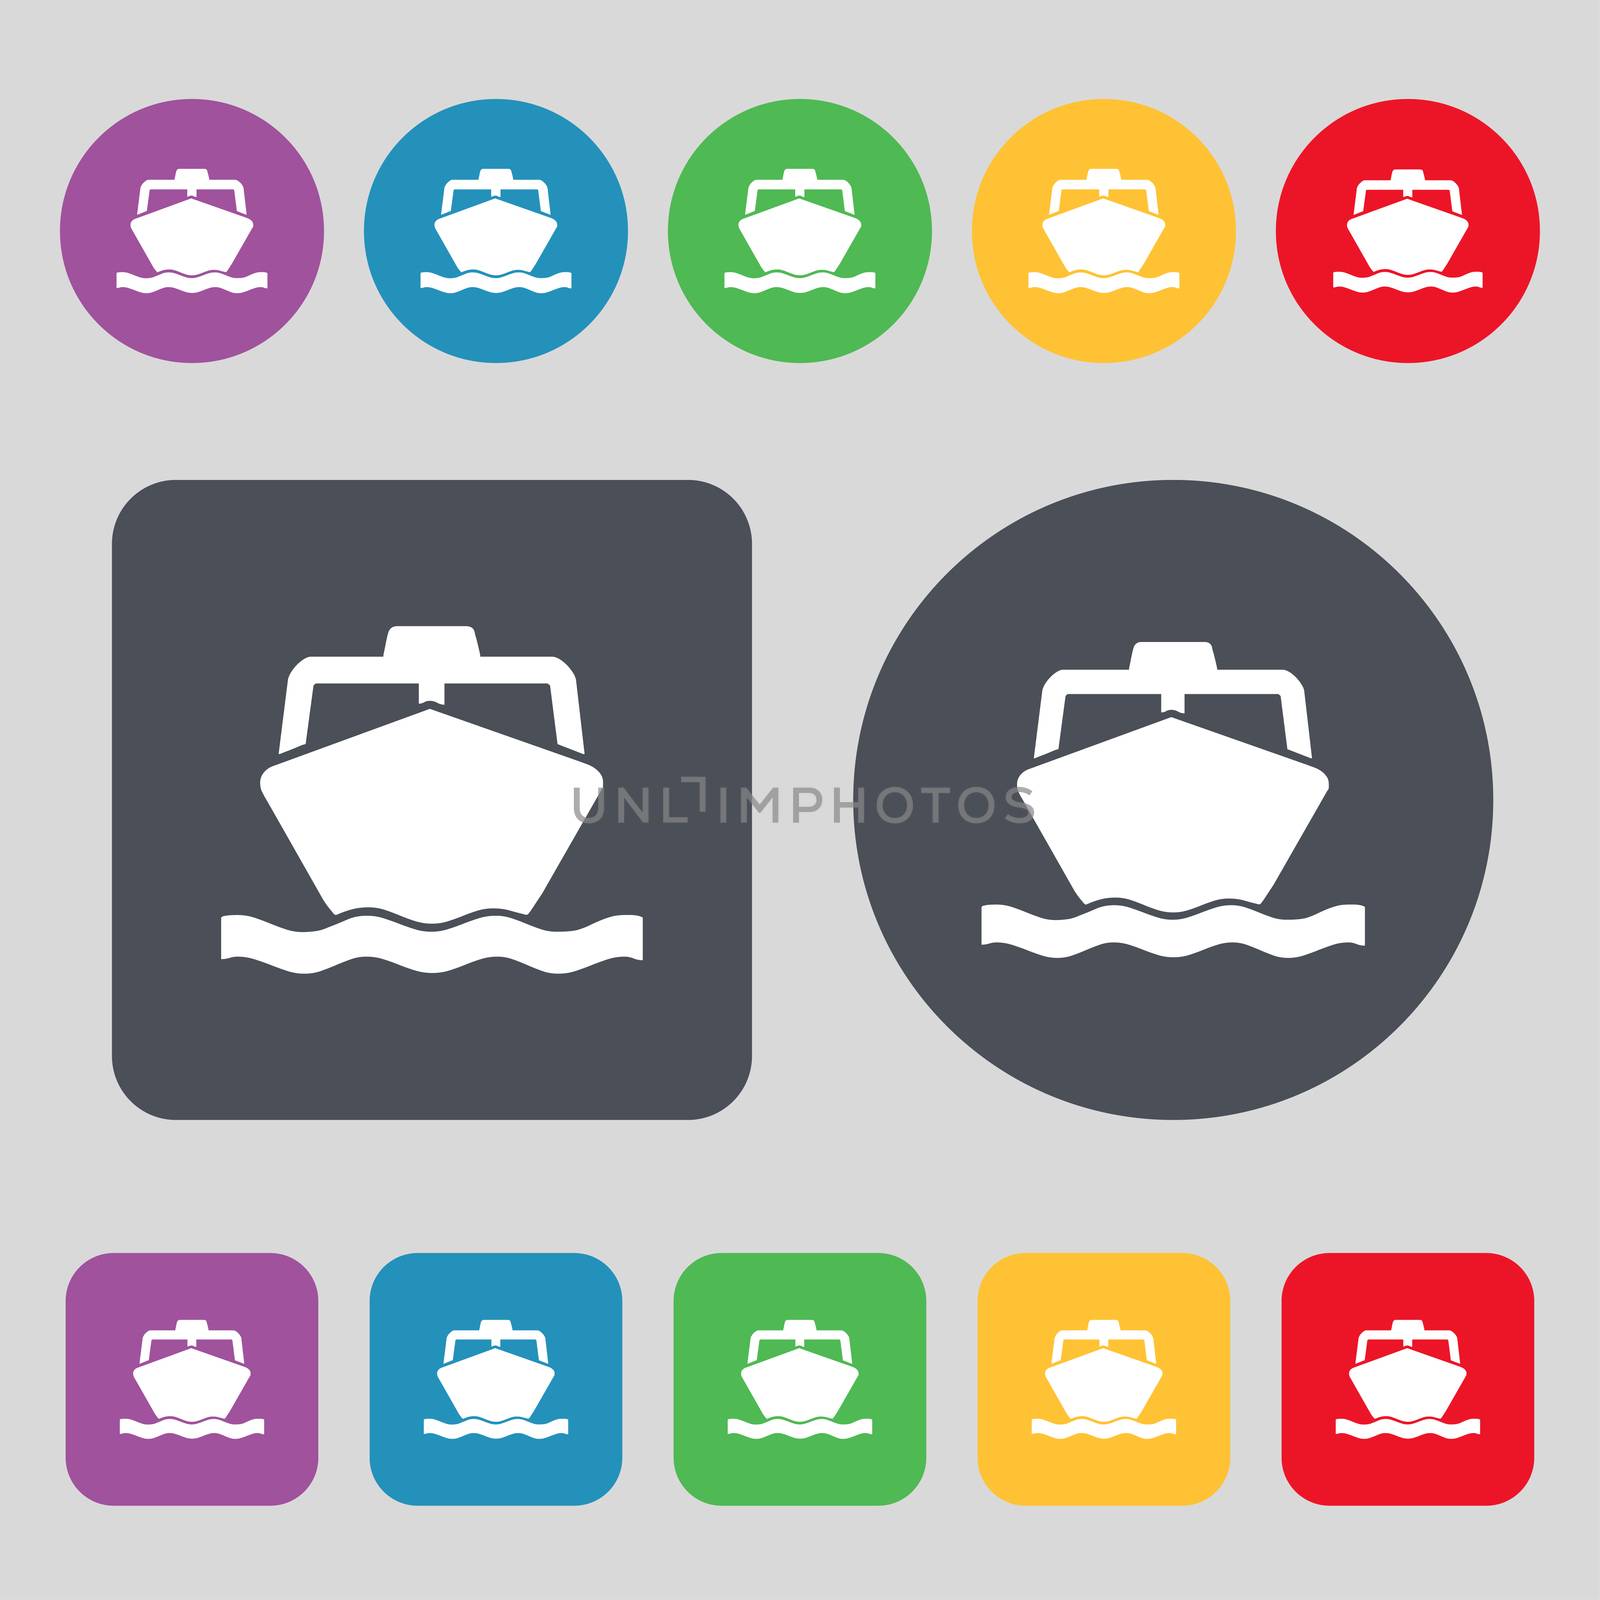 the boat icon sign. A set of 12 colored buttons. Flat design. illustration